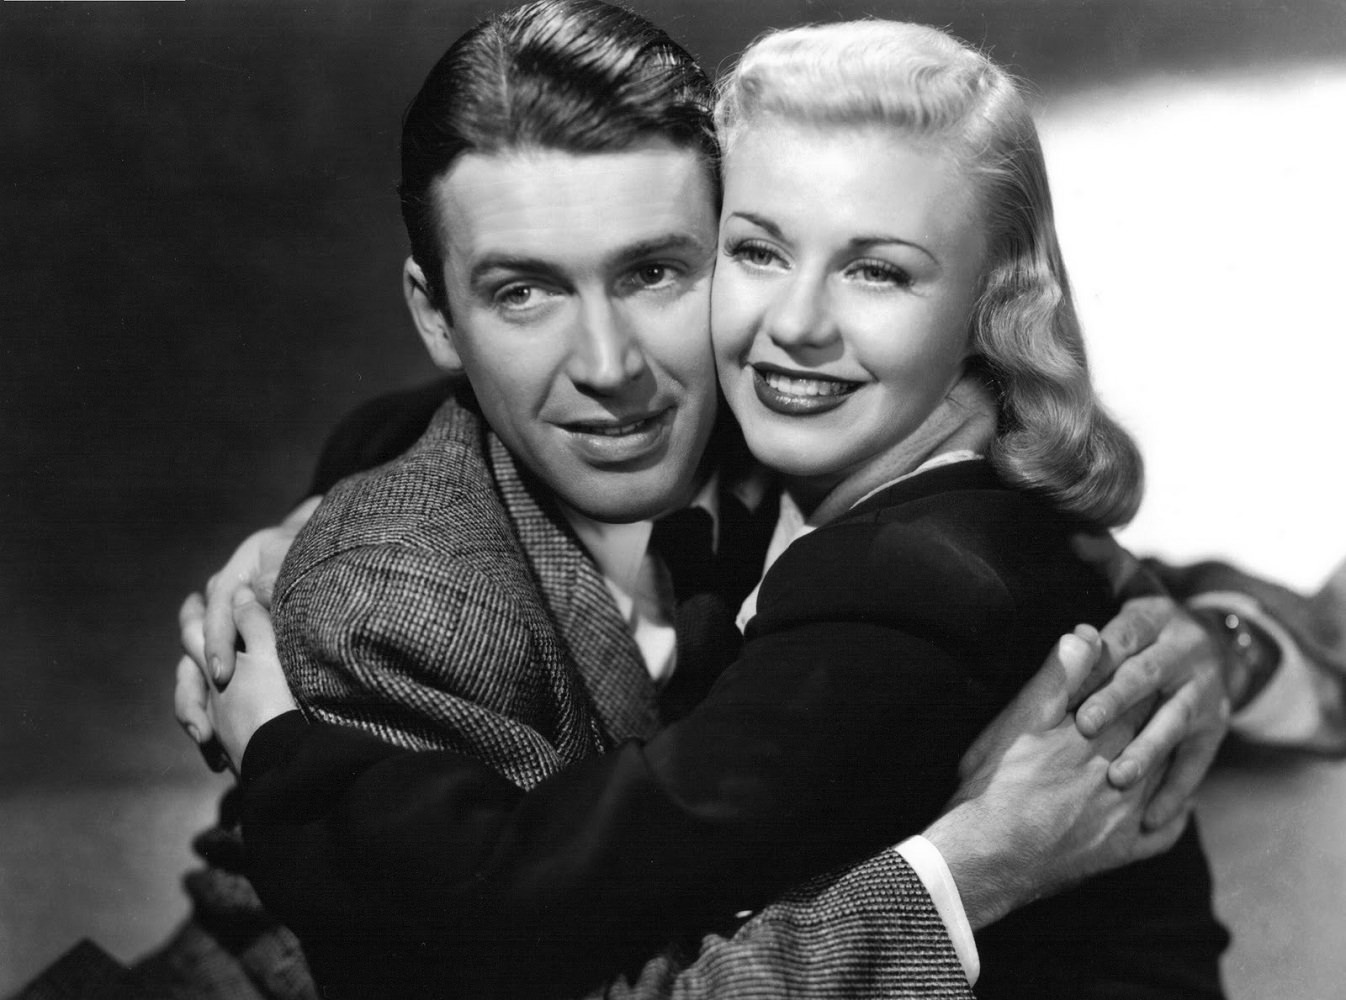 James Stewart and Ginger Rogers in Vivacious lady, 1938